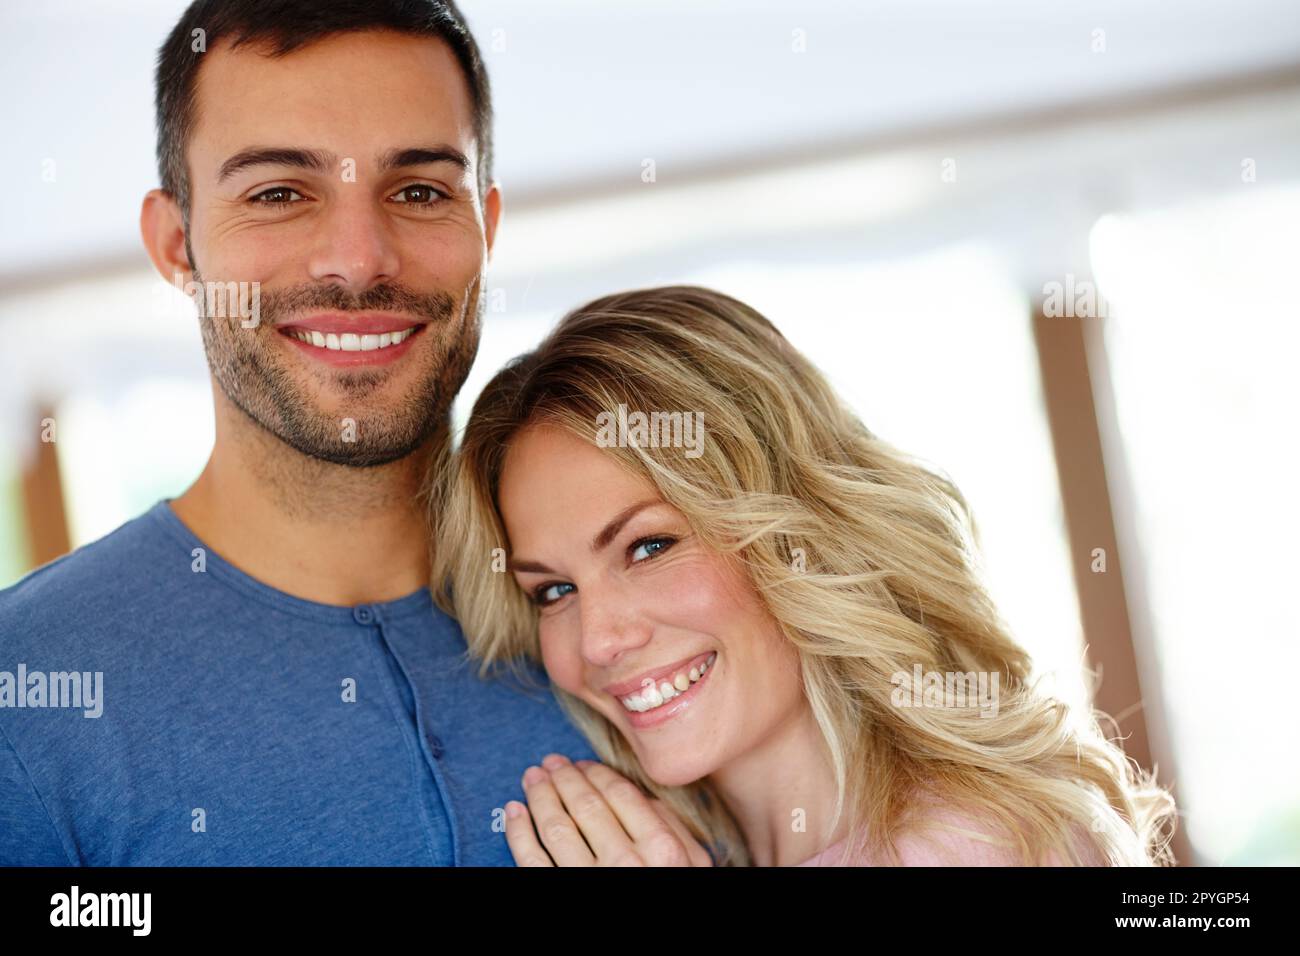 We couldnt be happier. Portrait of an affectionate young couple. Stock Photo